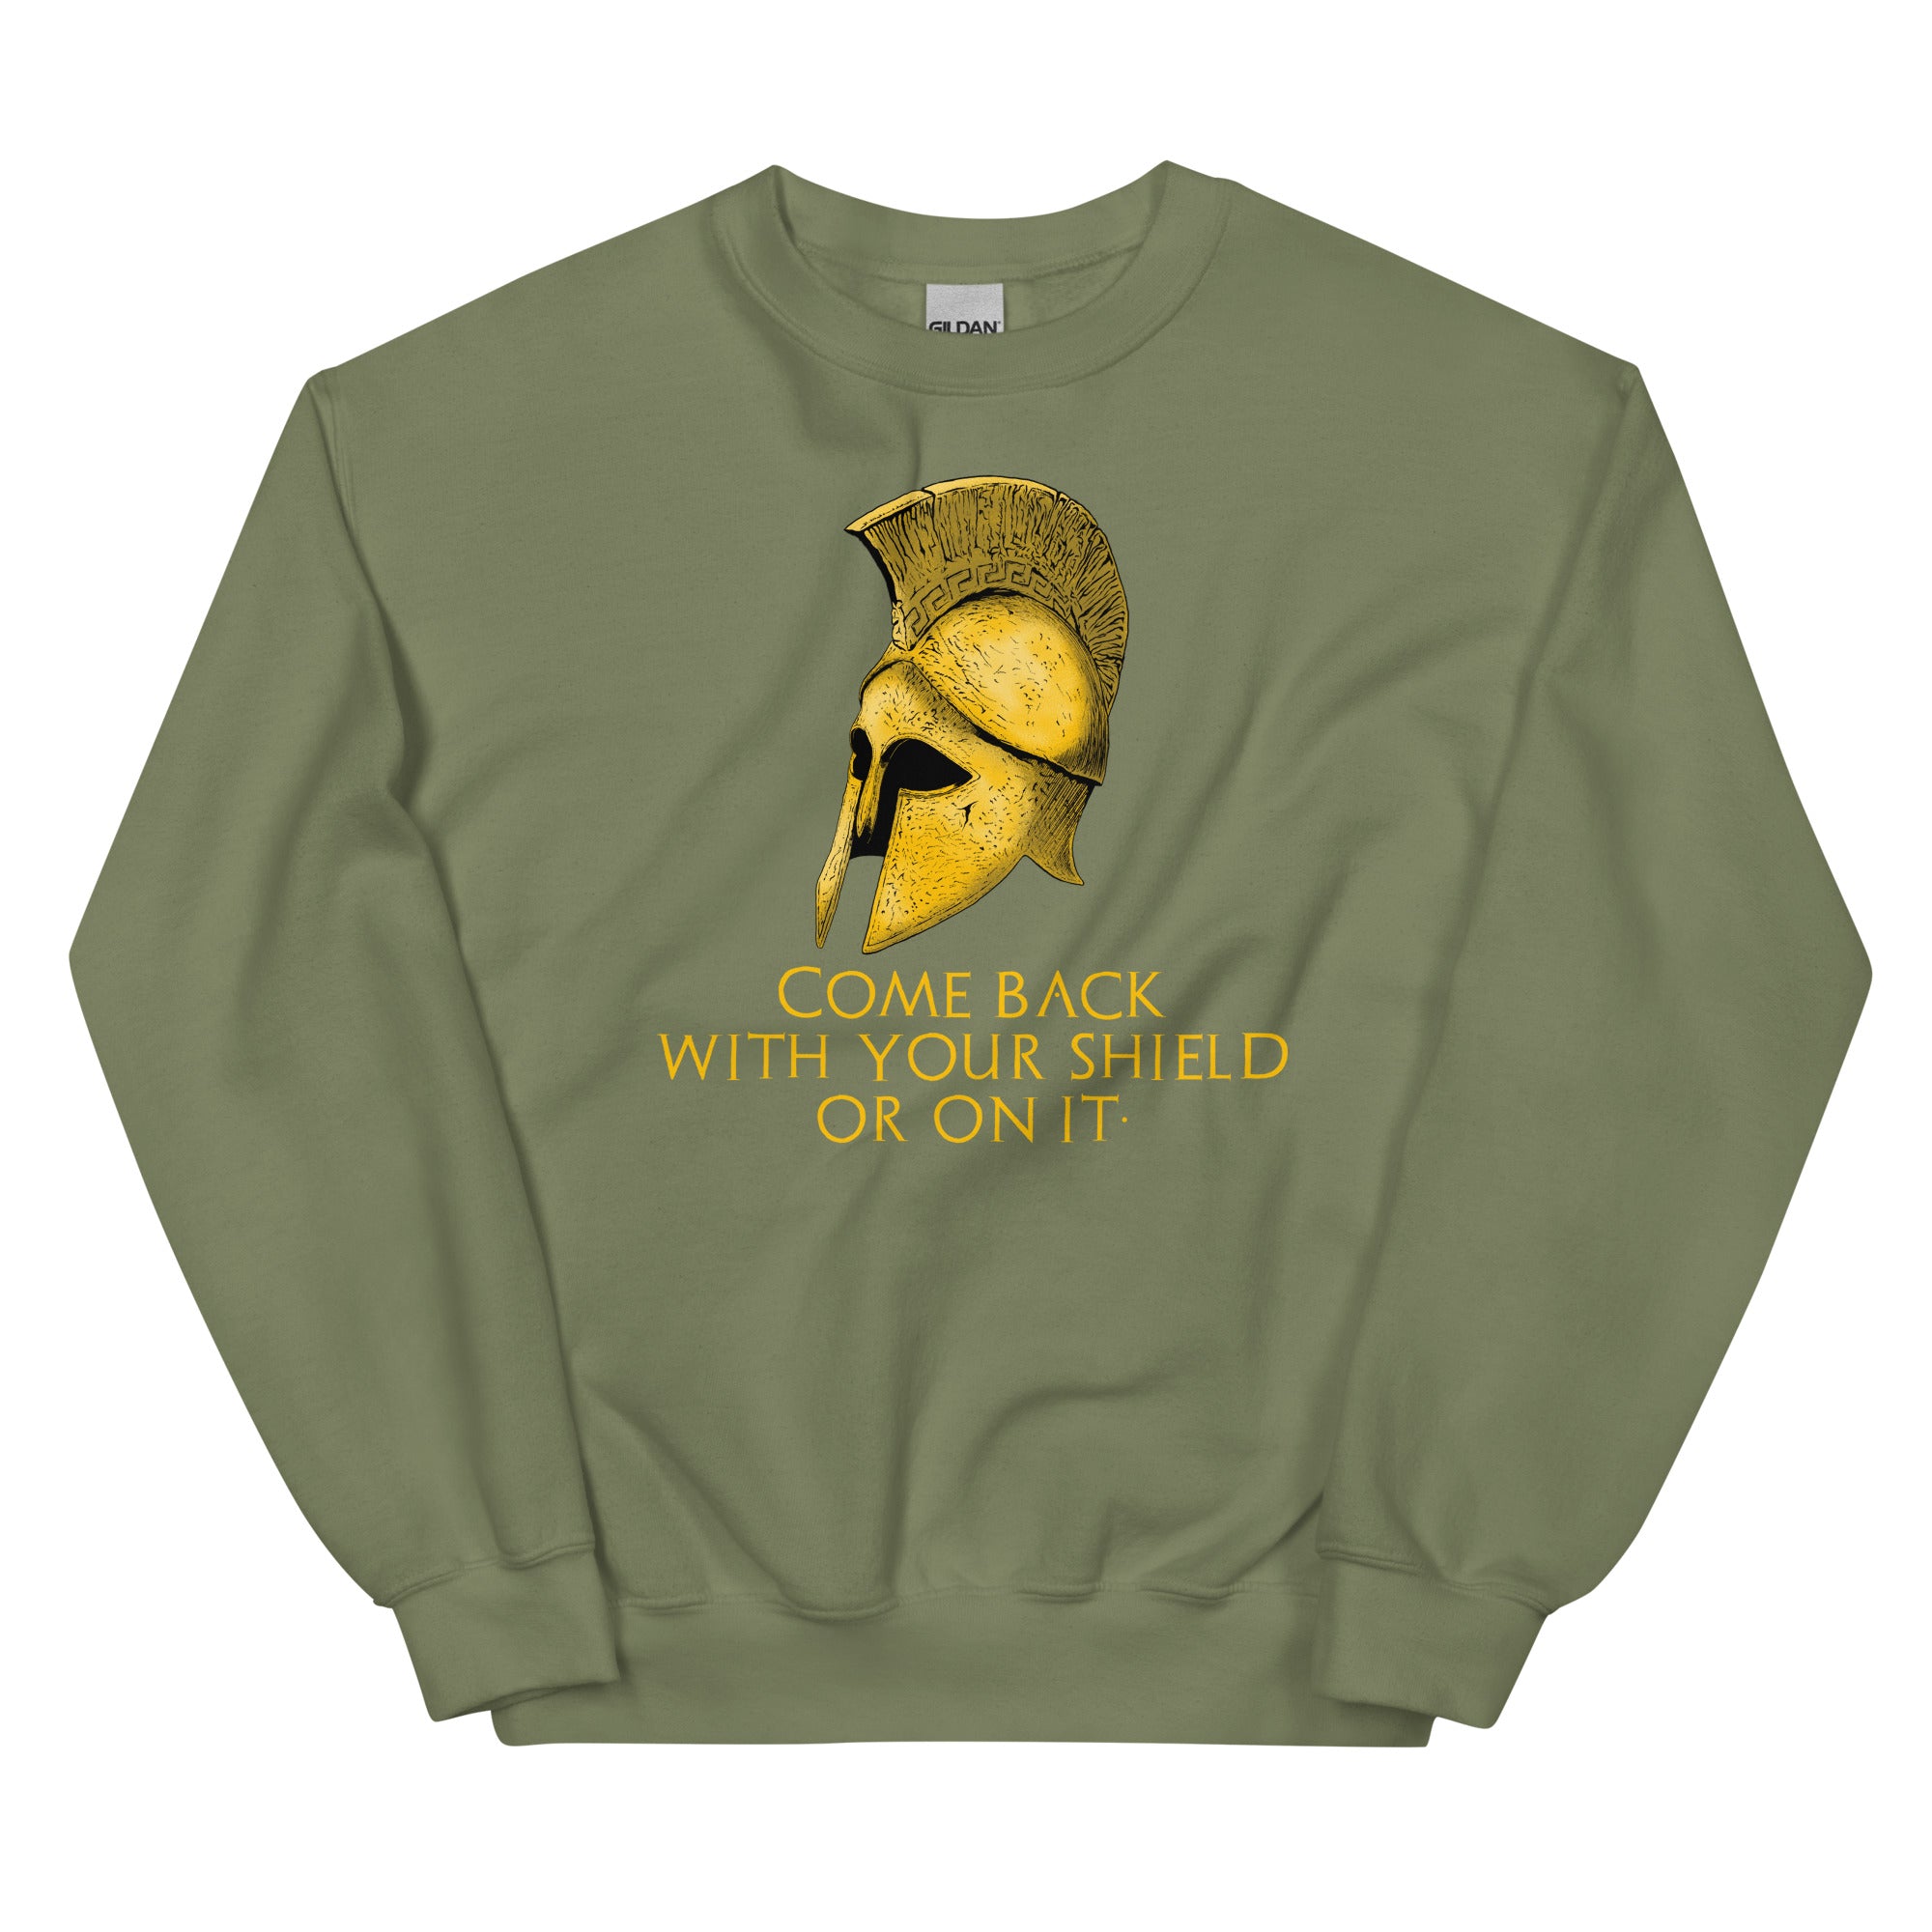 Come back with your shield or on it - Ancient Sparta - Unisex Sweatshirt